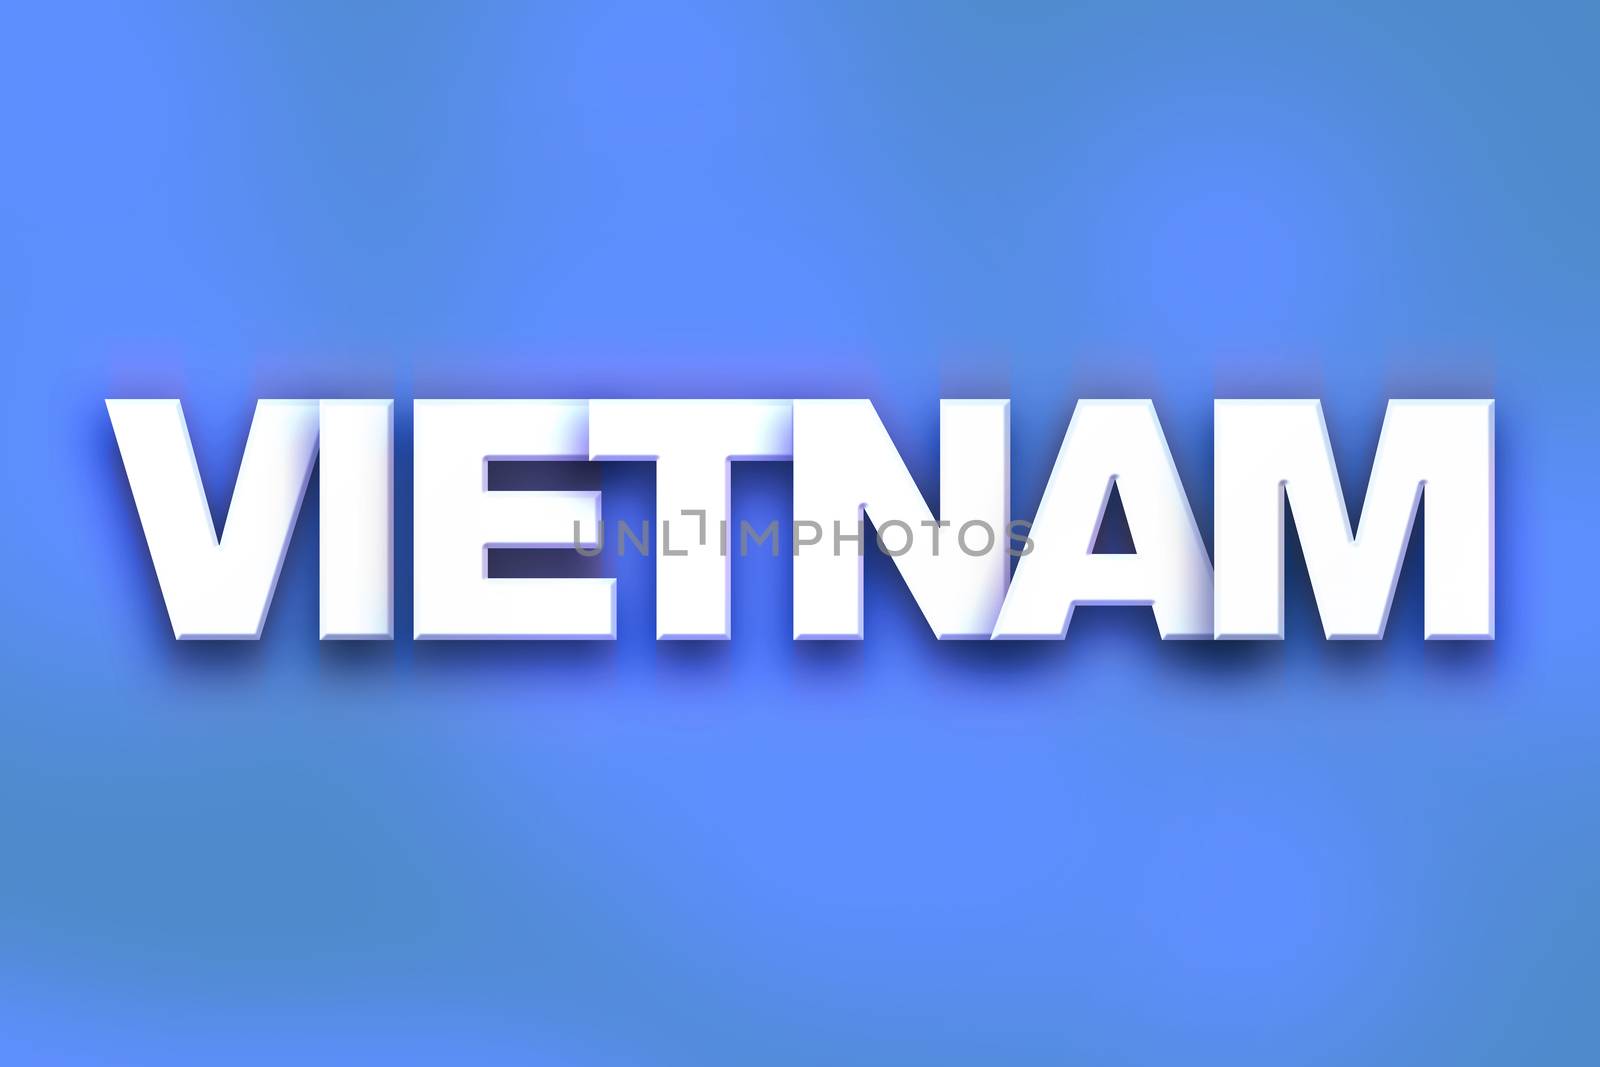 The word "Vietnam" written in white 3D letters on a colorful background concept and theme.